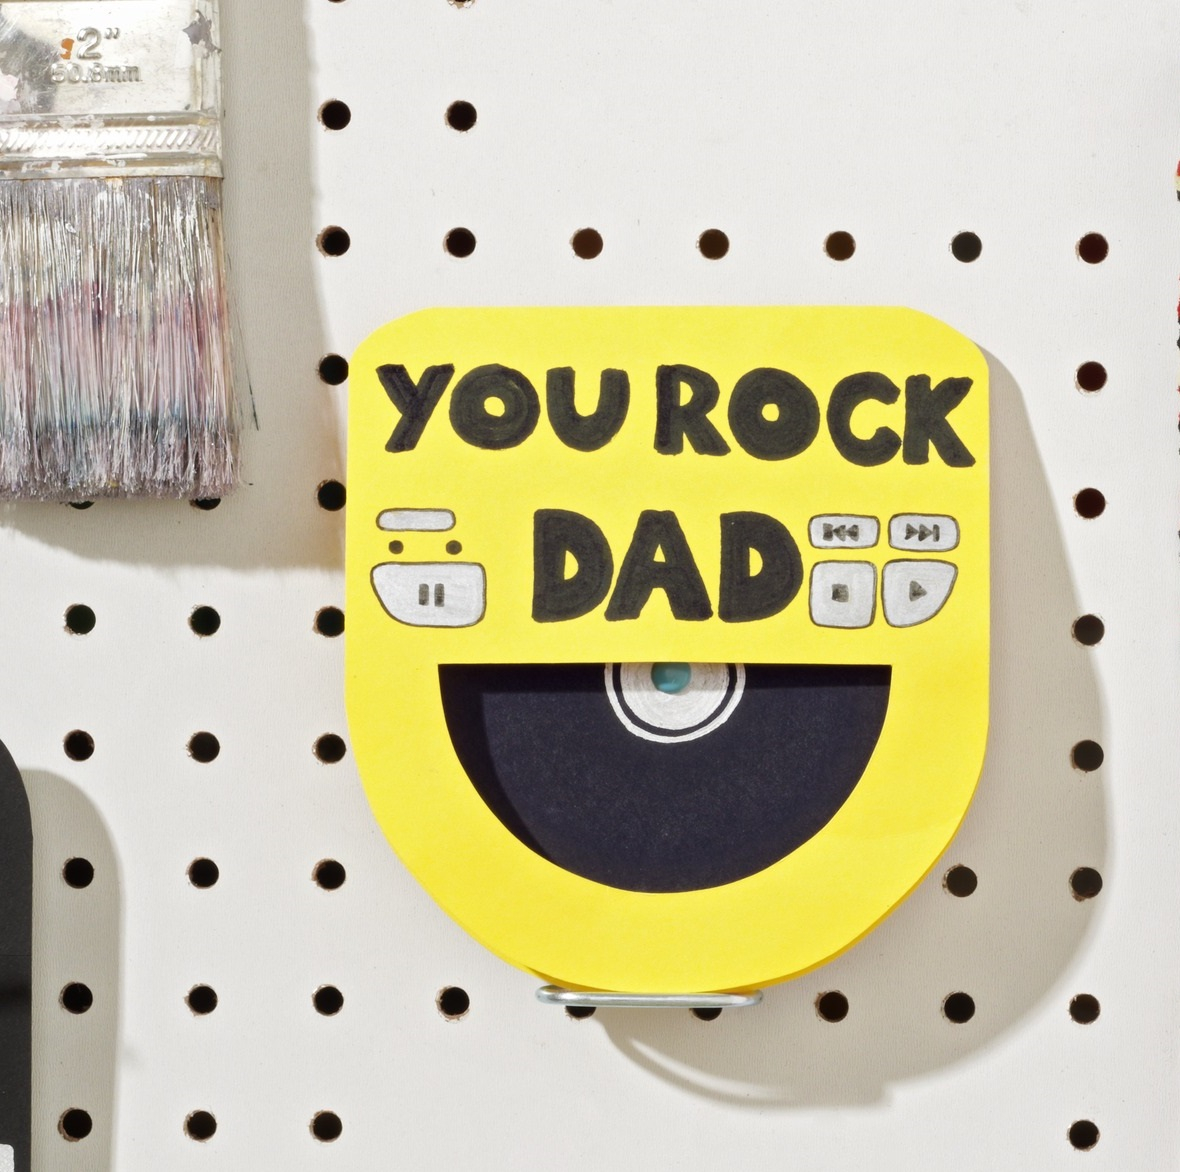 Birthday Cards Ideas For Dad Fathers Day Crafts For Kids 21 Too Cute Gift Ideas For Dad Parents